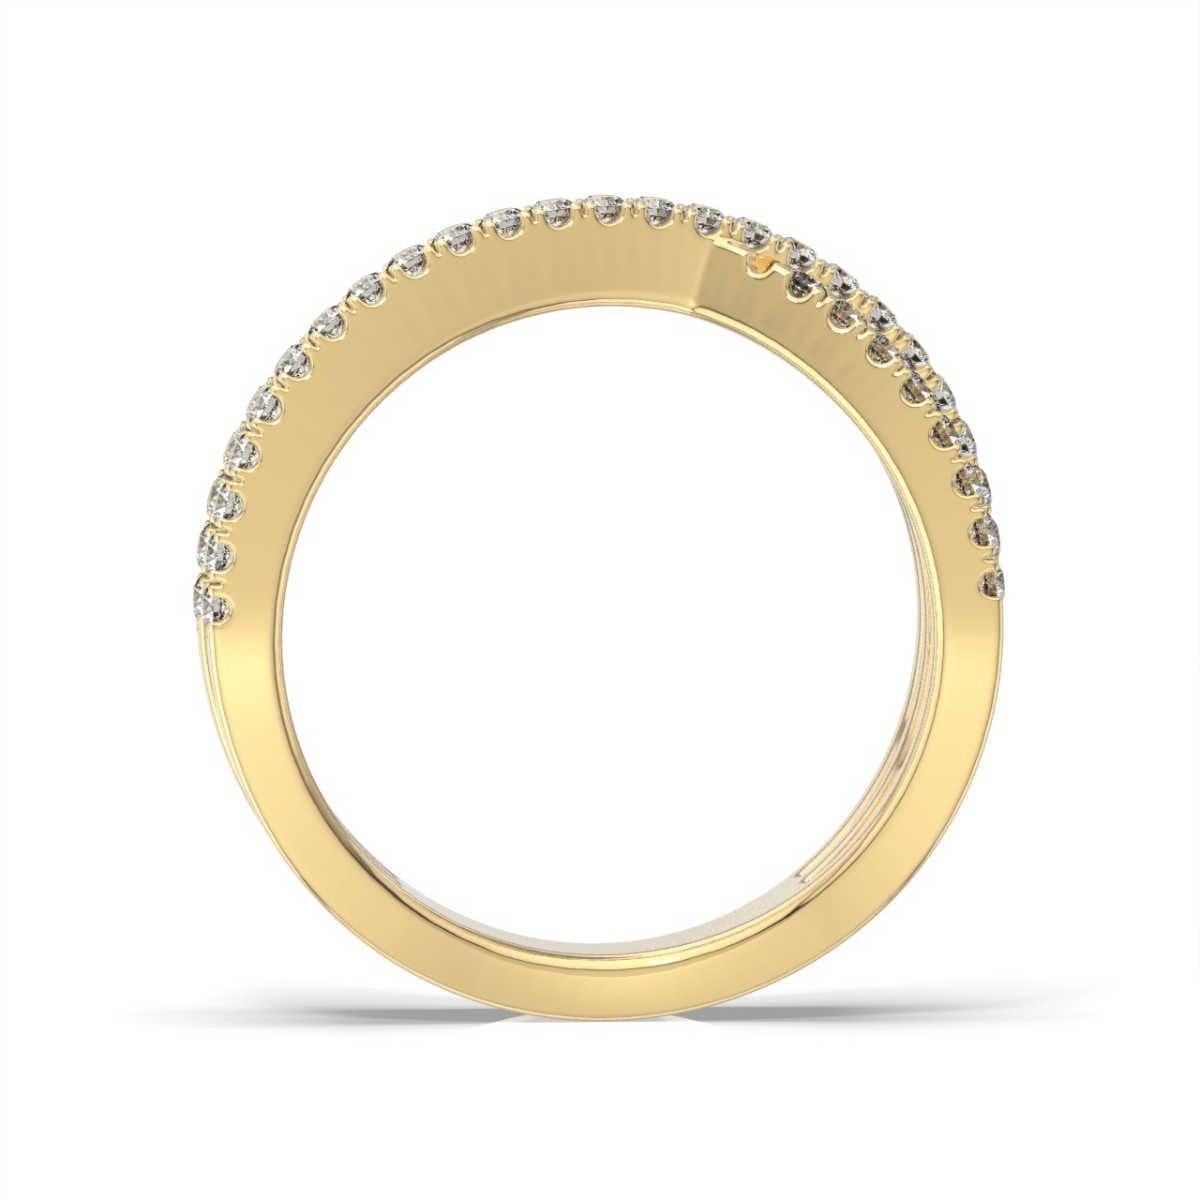 This contemporary, fashionable ring features three rows of Interweave Micro Prongs set diamonds.

Product details: 

Center Gemstone Color: WHITE
Side Gemstone Type: NATURAL DIAMOND
Side Gemstone Shape: ROUND
Metal: 18K Yellow Gold
Metal Weight: